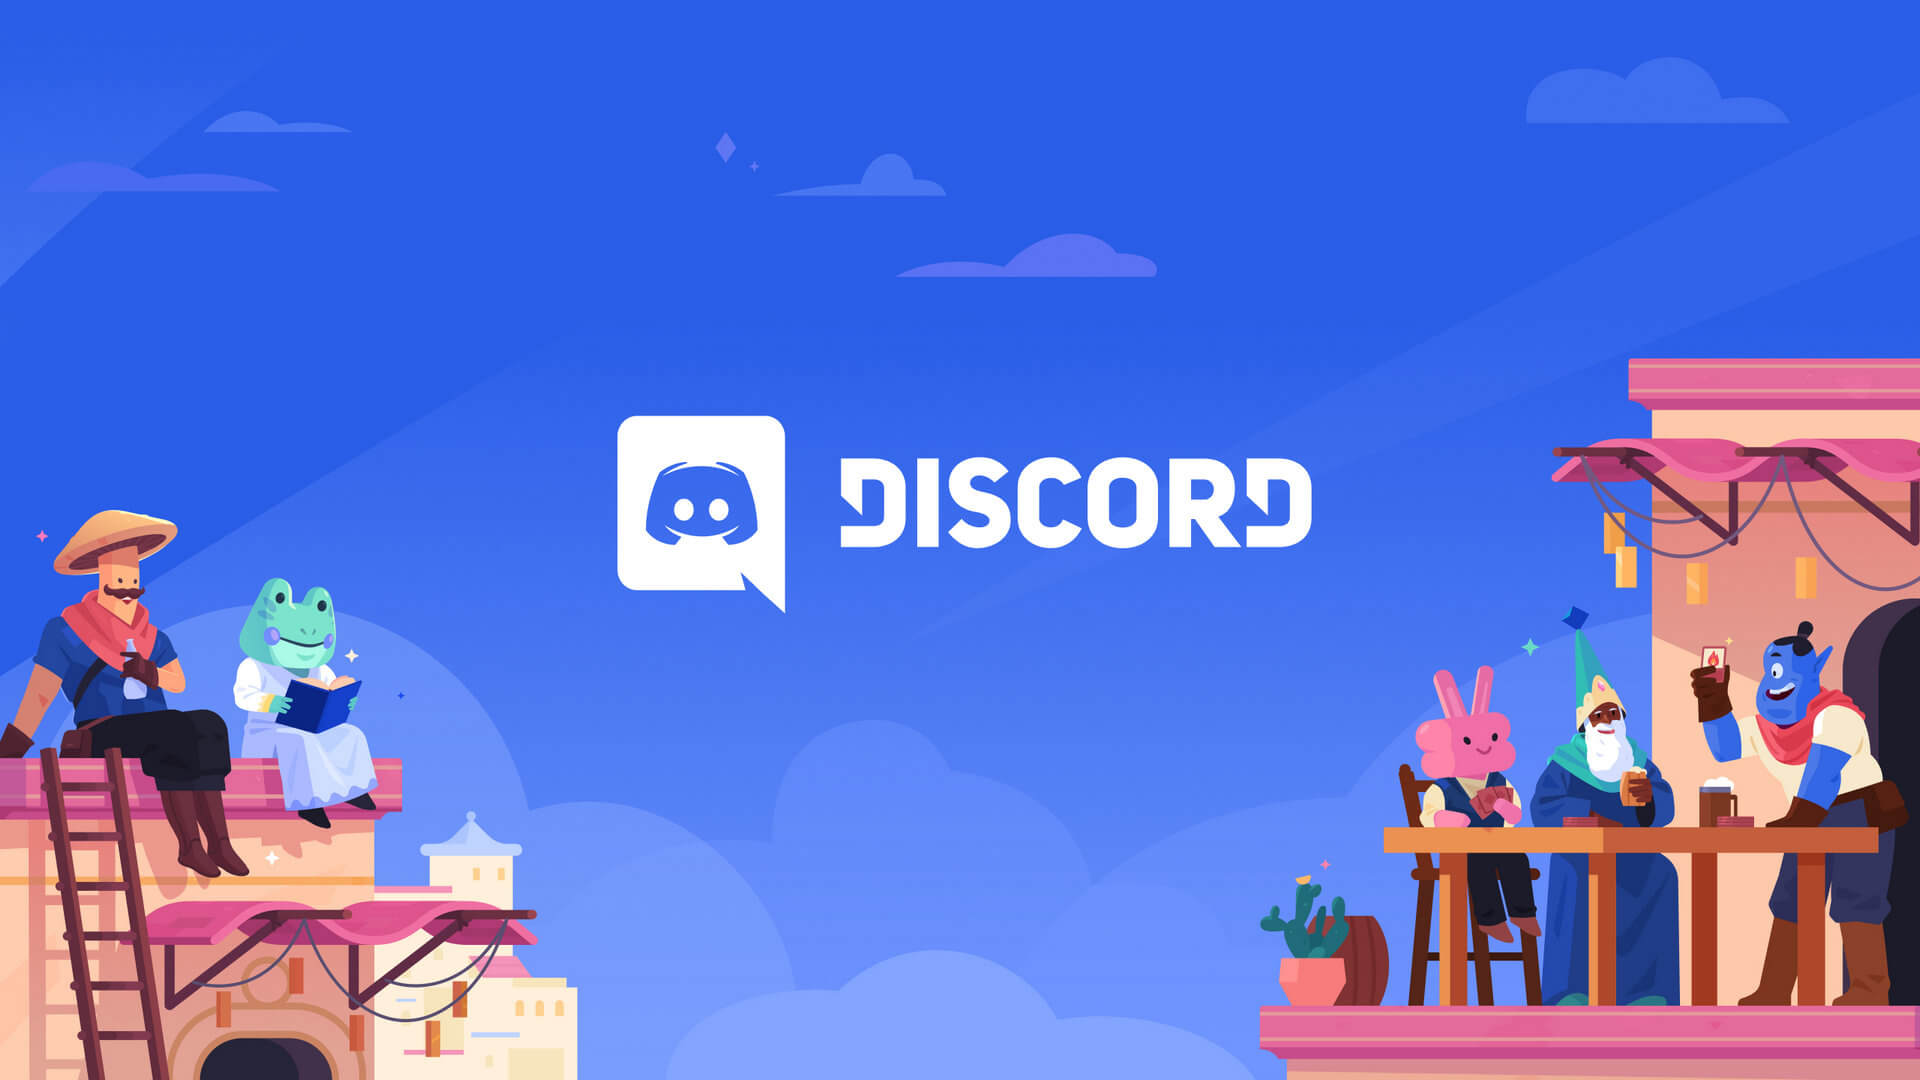 How To Create Server Roles On Discord?